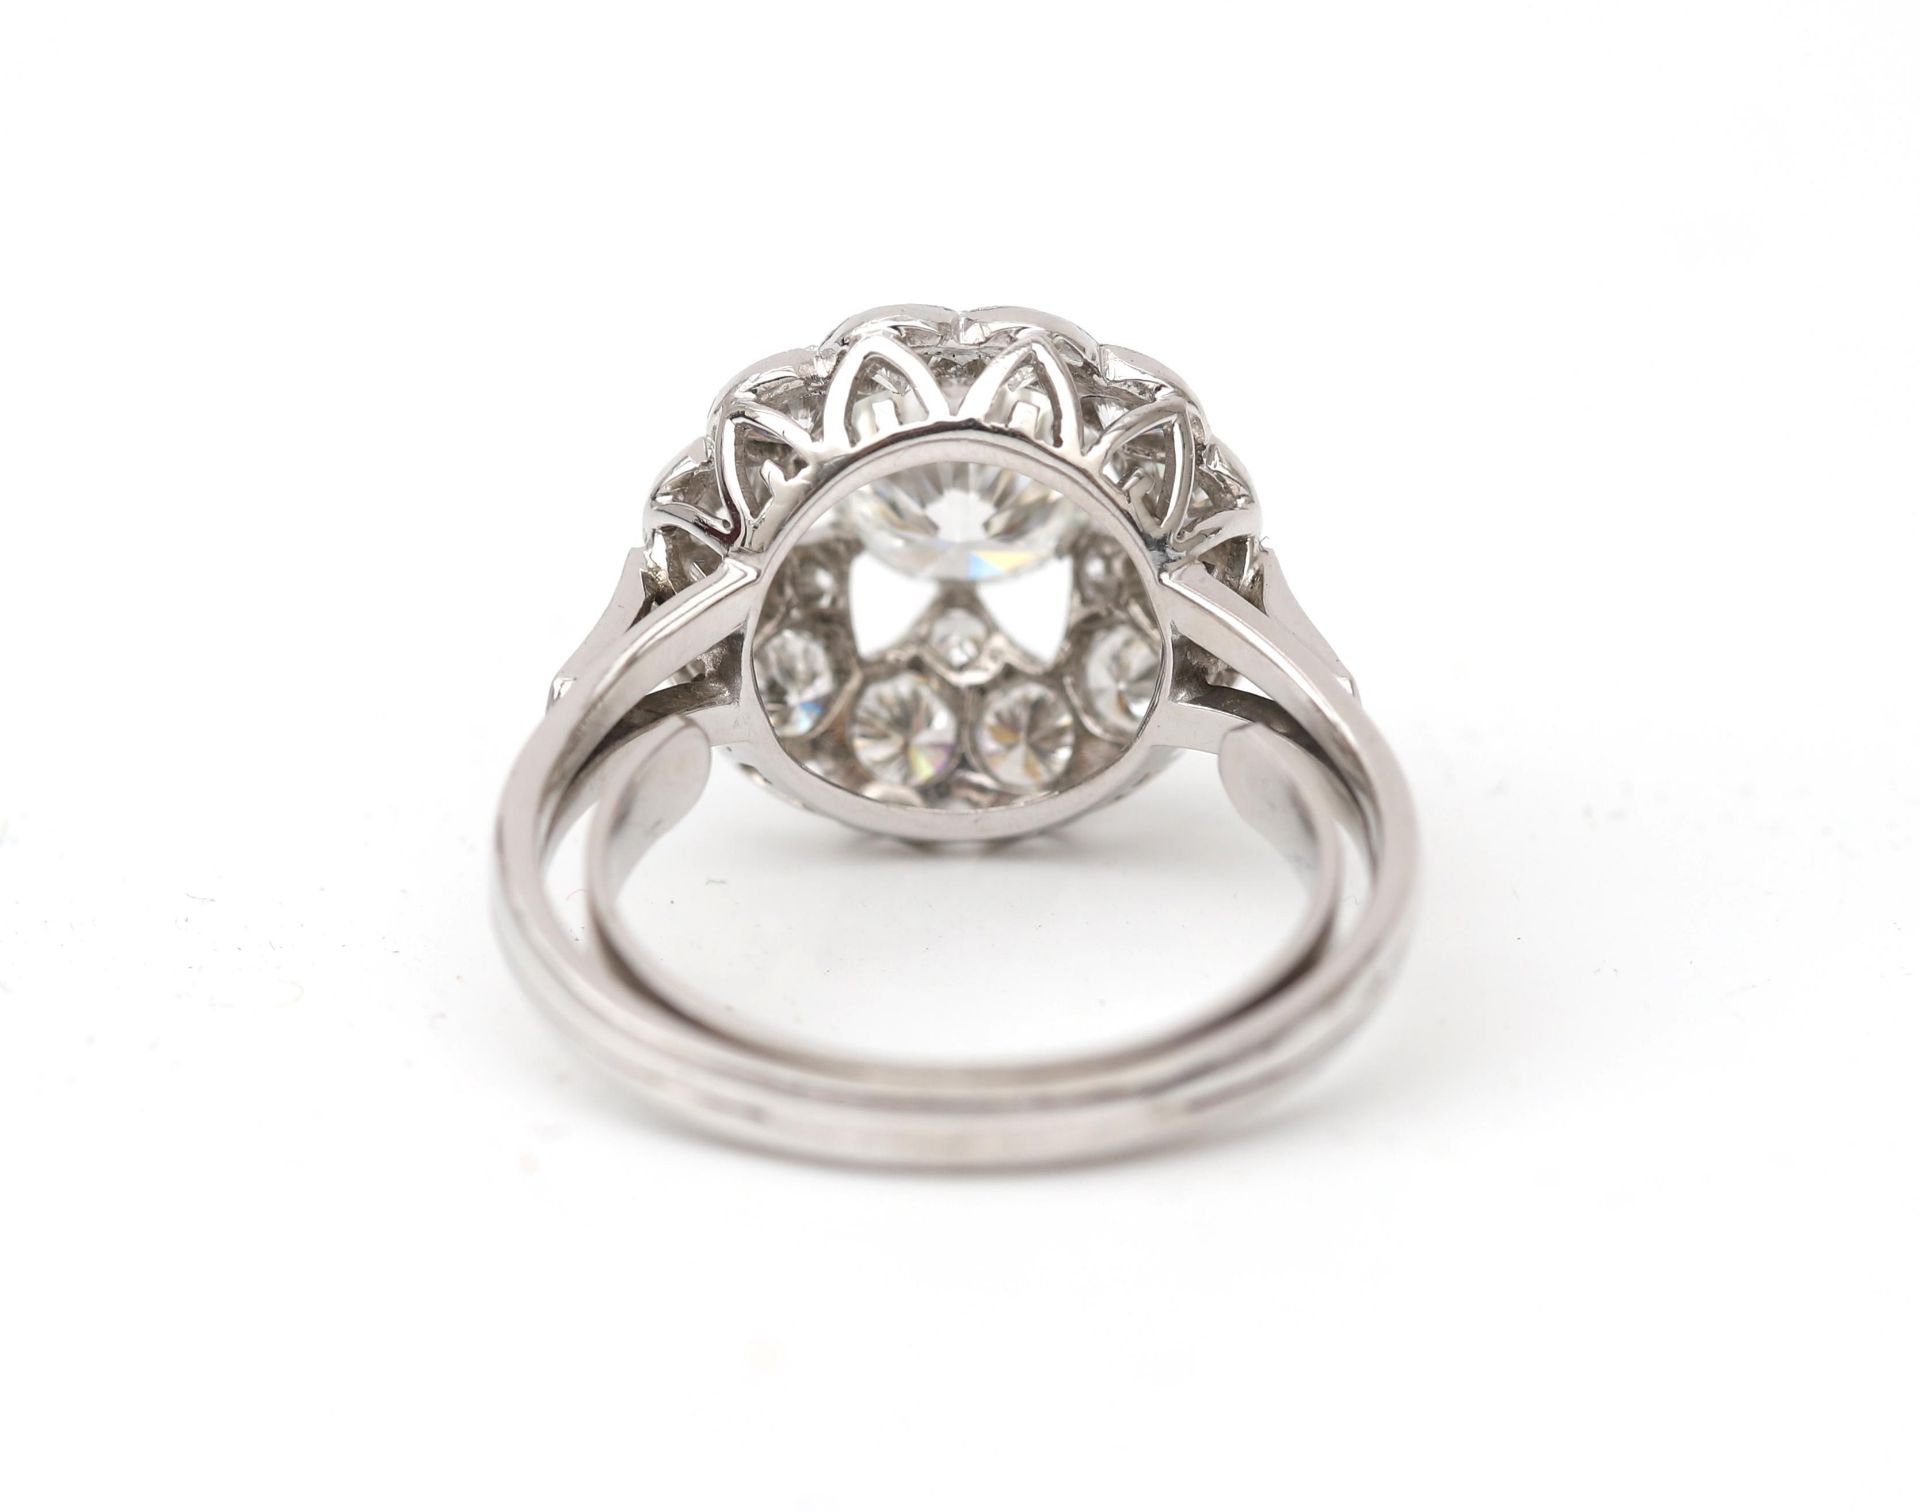 A 14 karat white gold with platinum rosette ring, set with diamonds, in total approx. 2.21ct. - Image 8 of 10